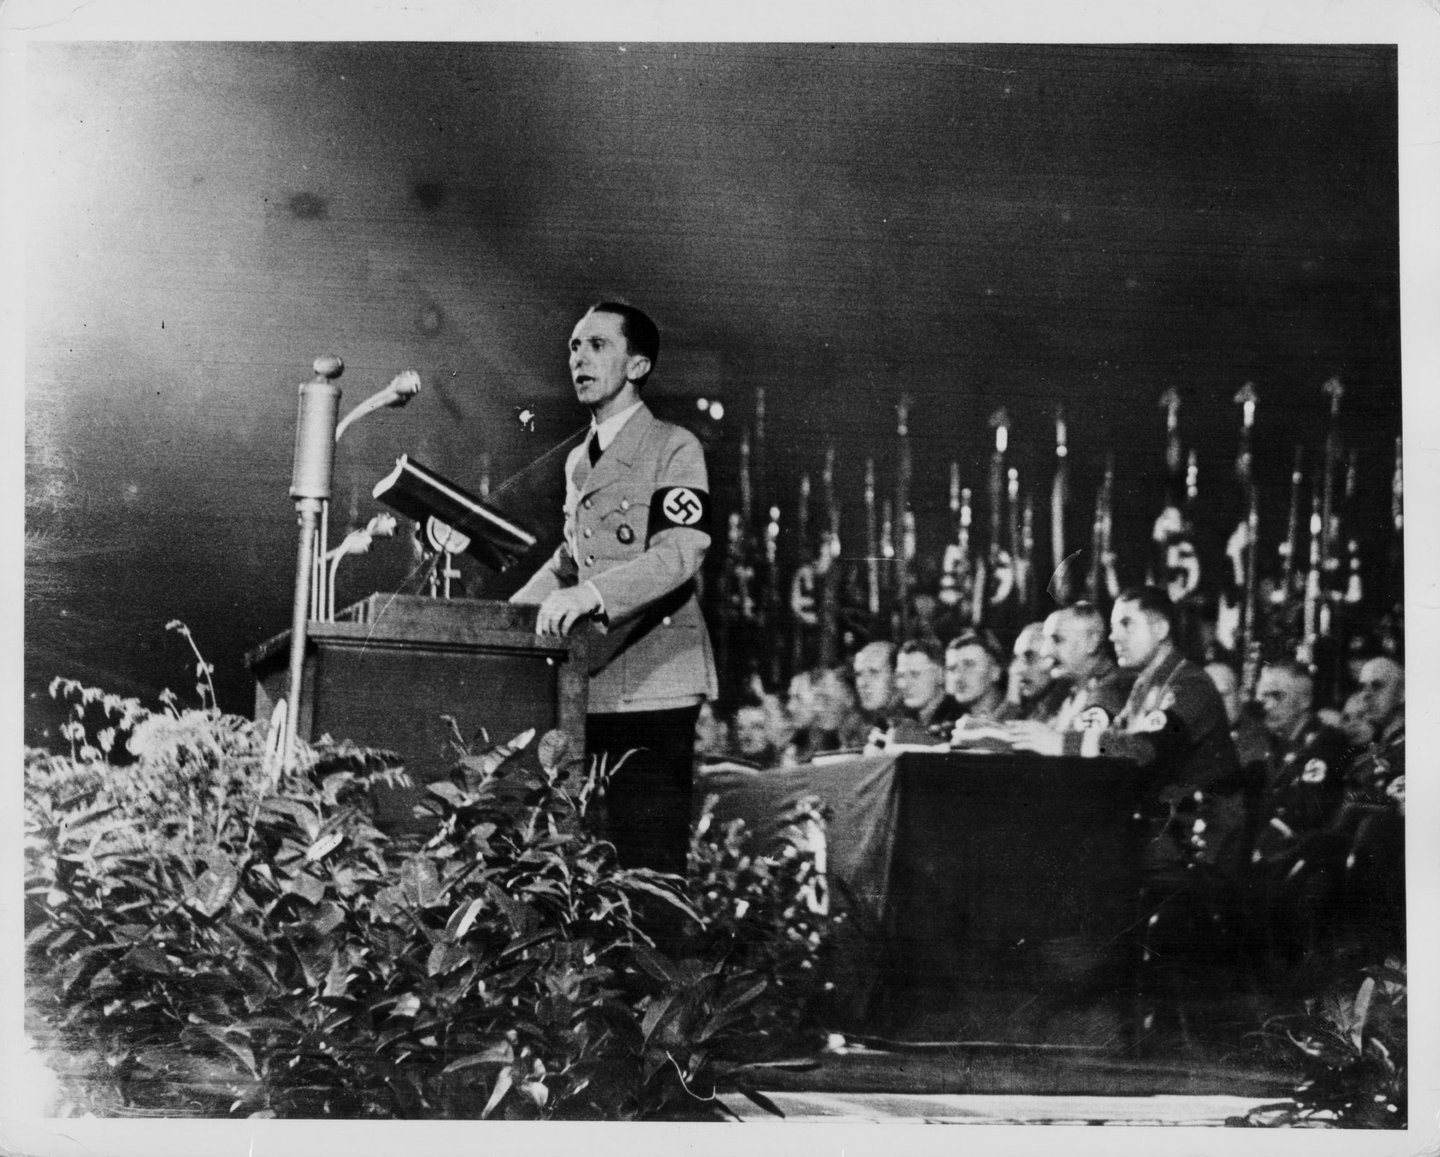 Dr Joseph Goebbels, Reich Minister of Propaganda for the Nazi Party, giving a speech as part of the political campaign, Berlin, March 12th 1936. (Photo by Central Press/Hulton Archive/Getty Images)